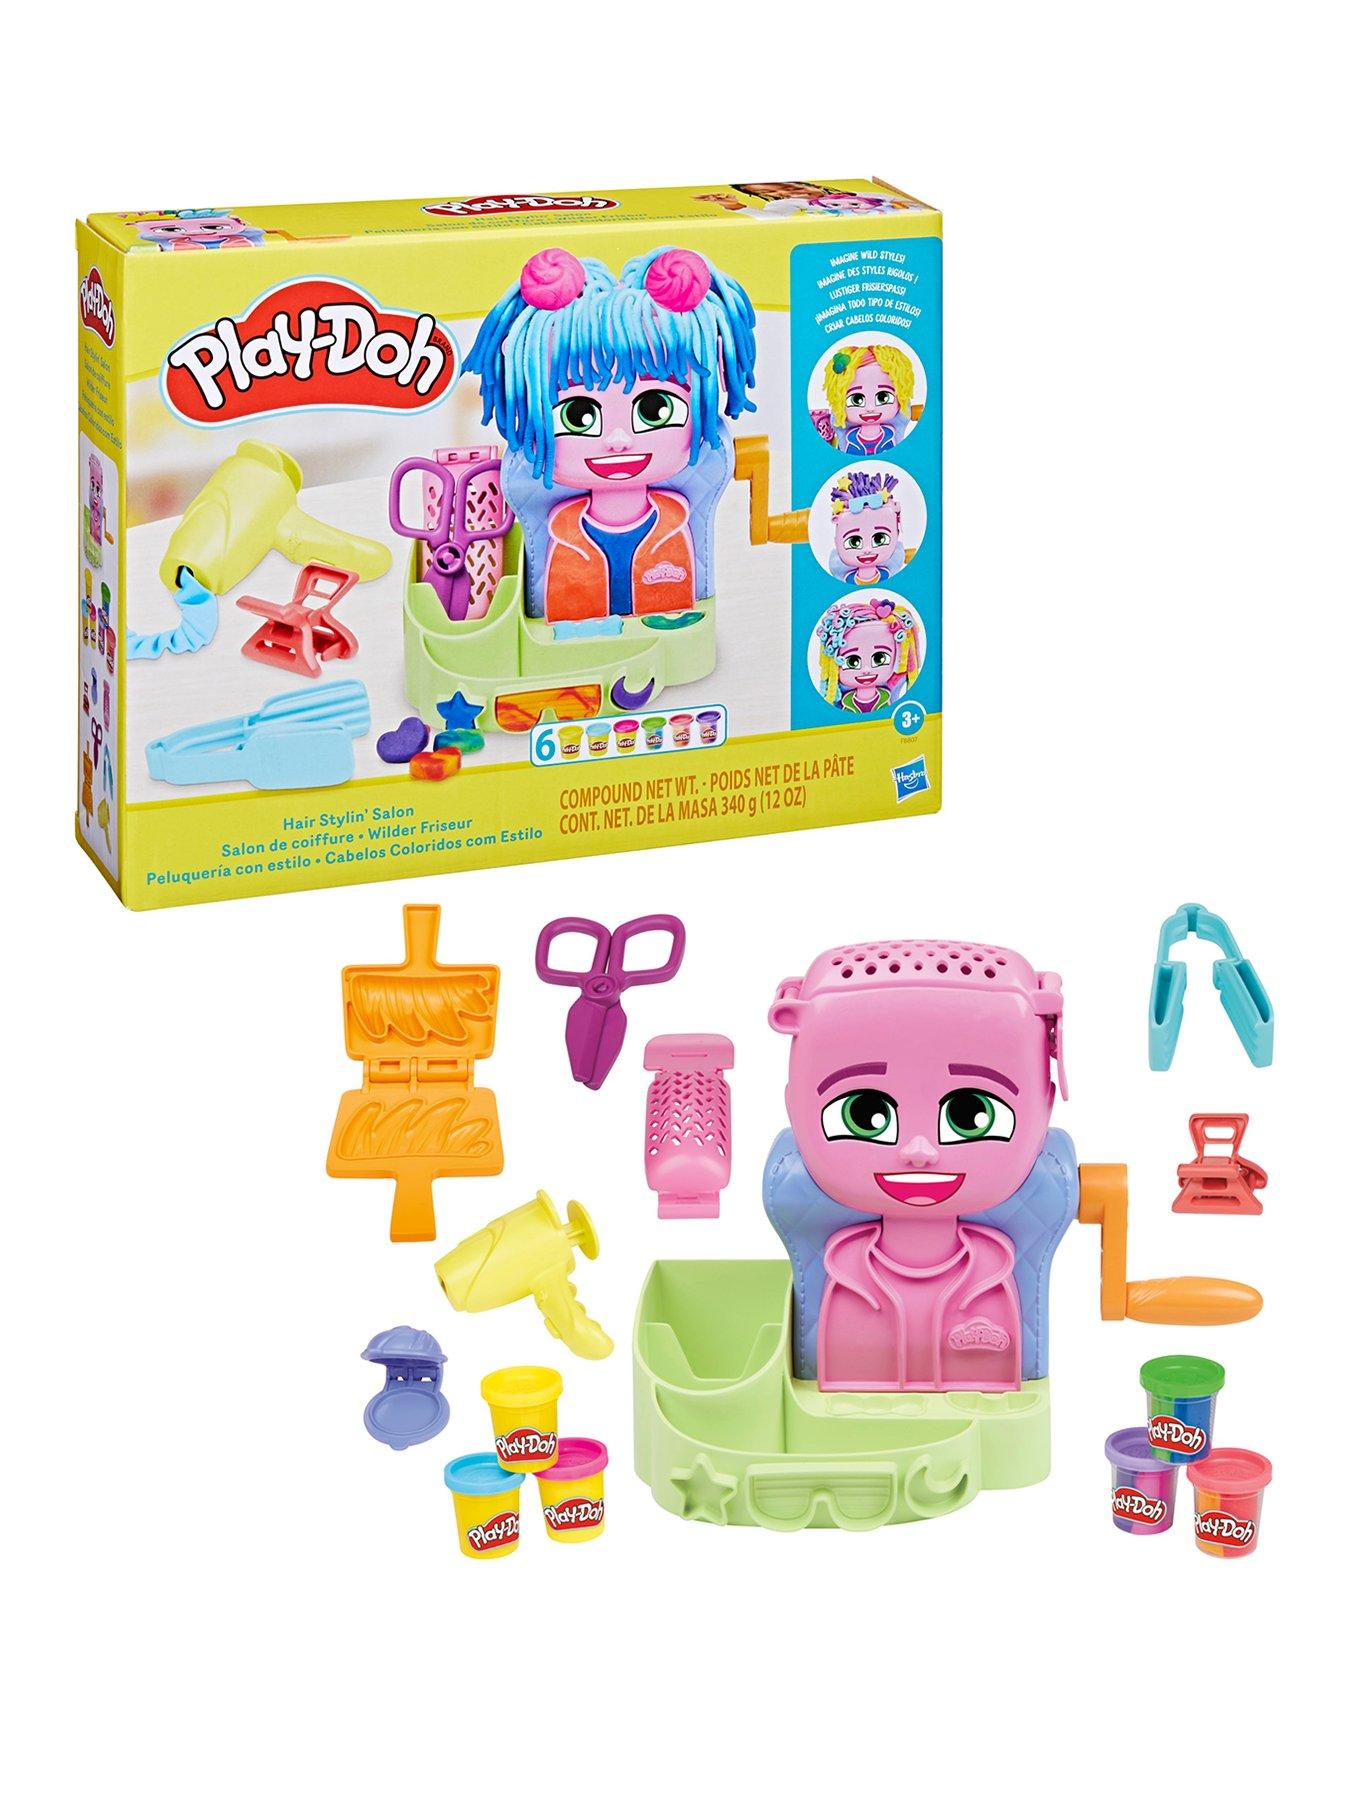 Play-Doh Kitchen Creations Breakfast Bakery Food Set with 6 Cans